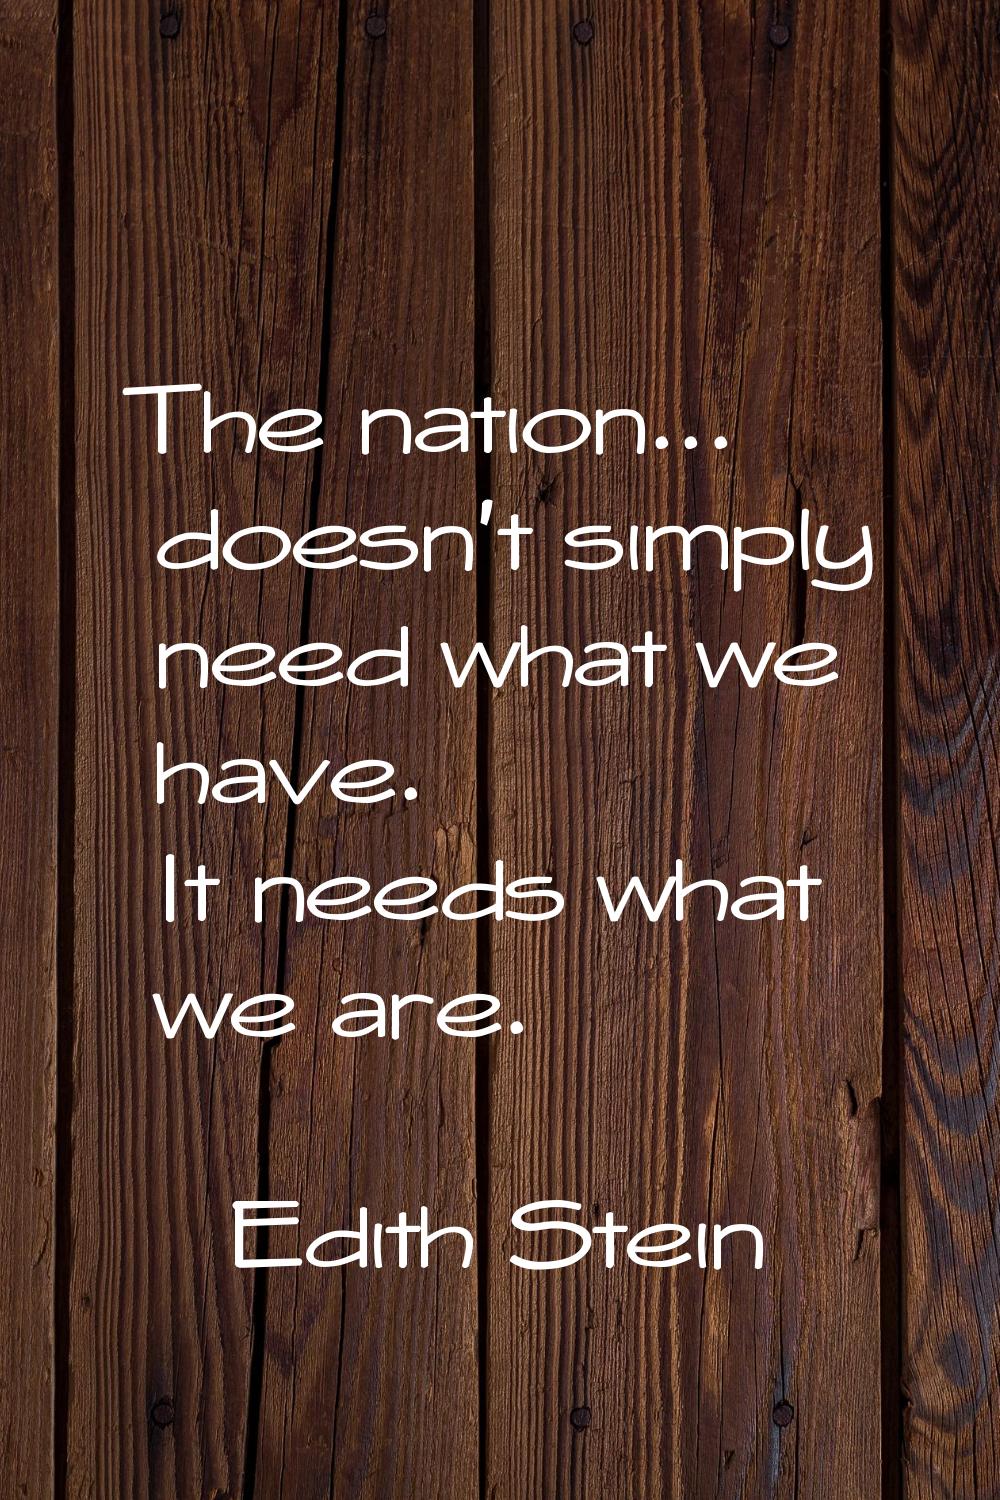 The nation... doesn't simply need what we have. It needs what we are.